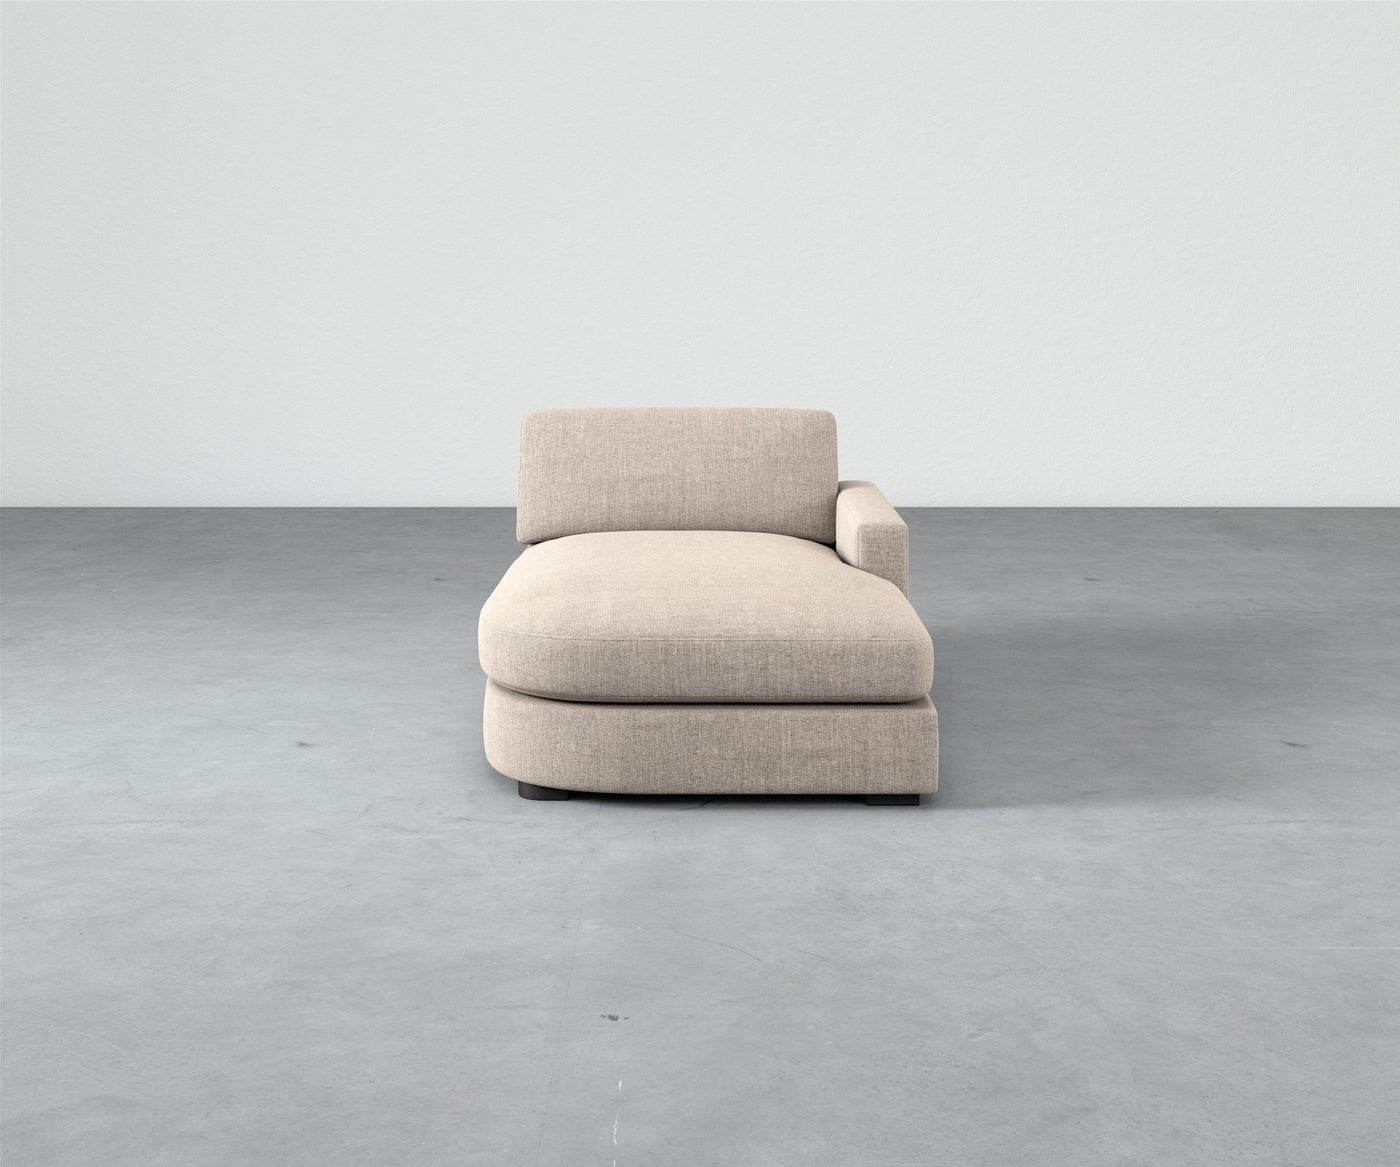 Coasty Rounded Chaise - Modular Component